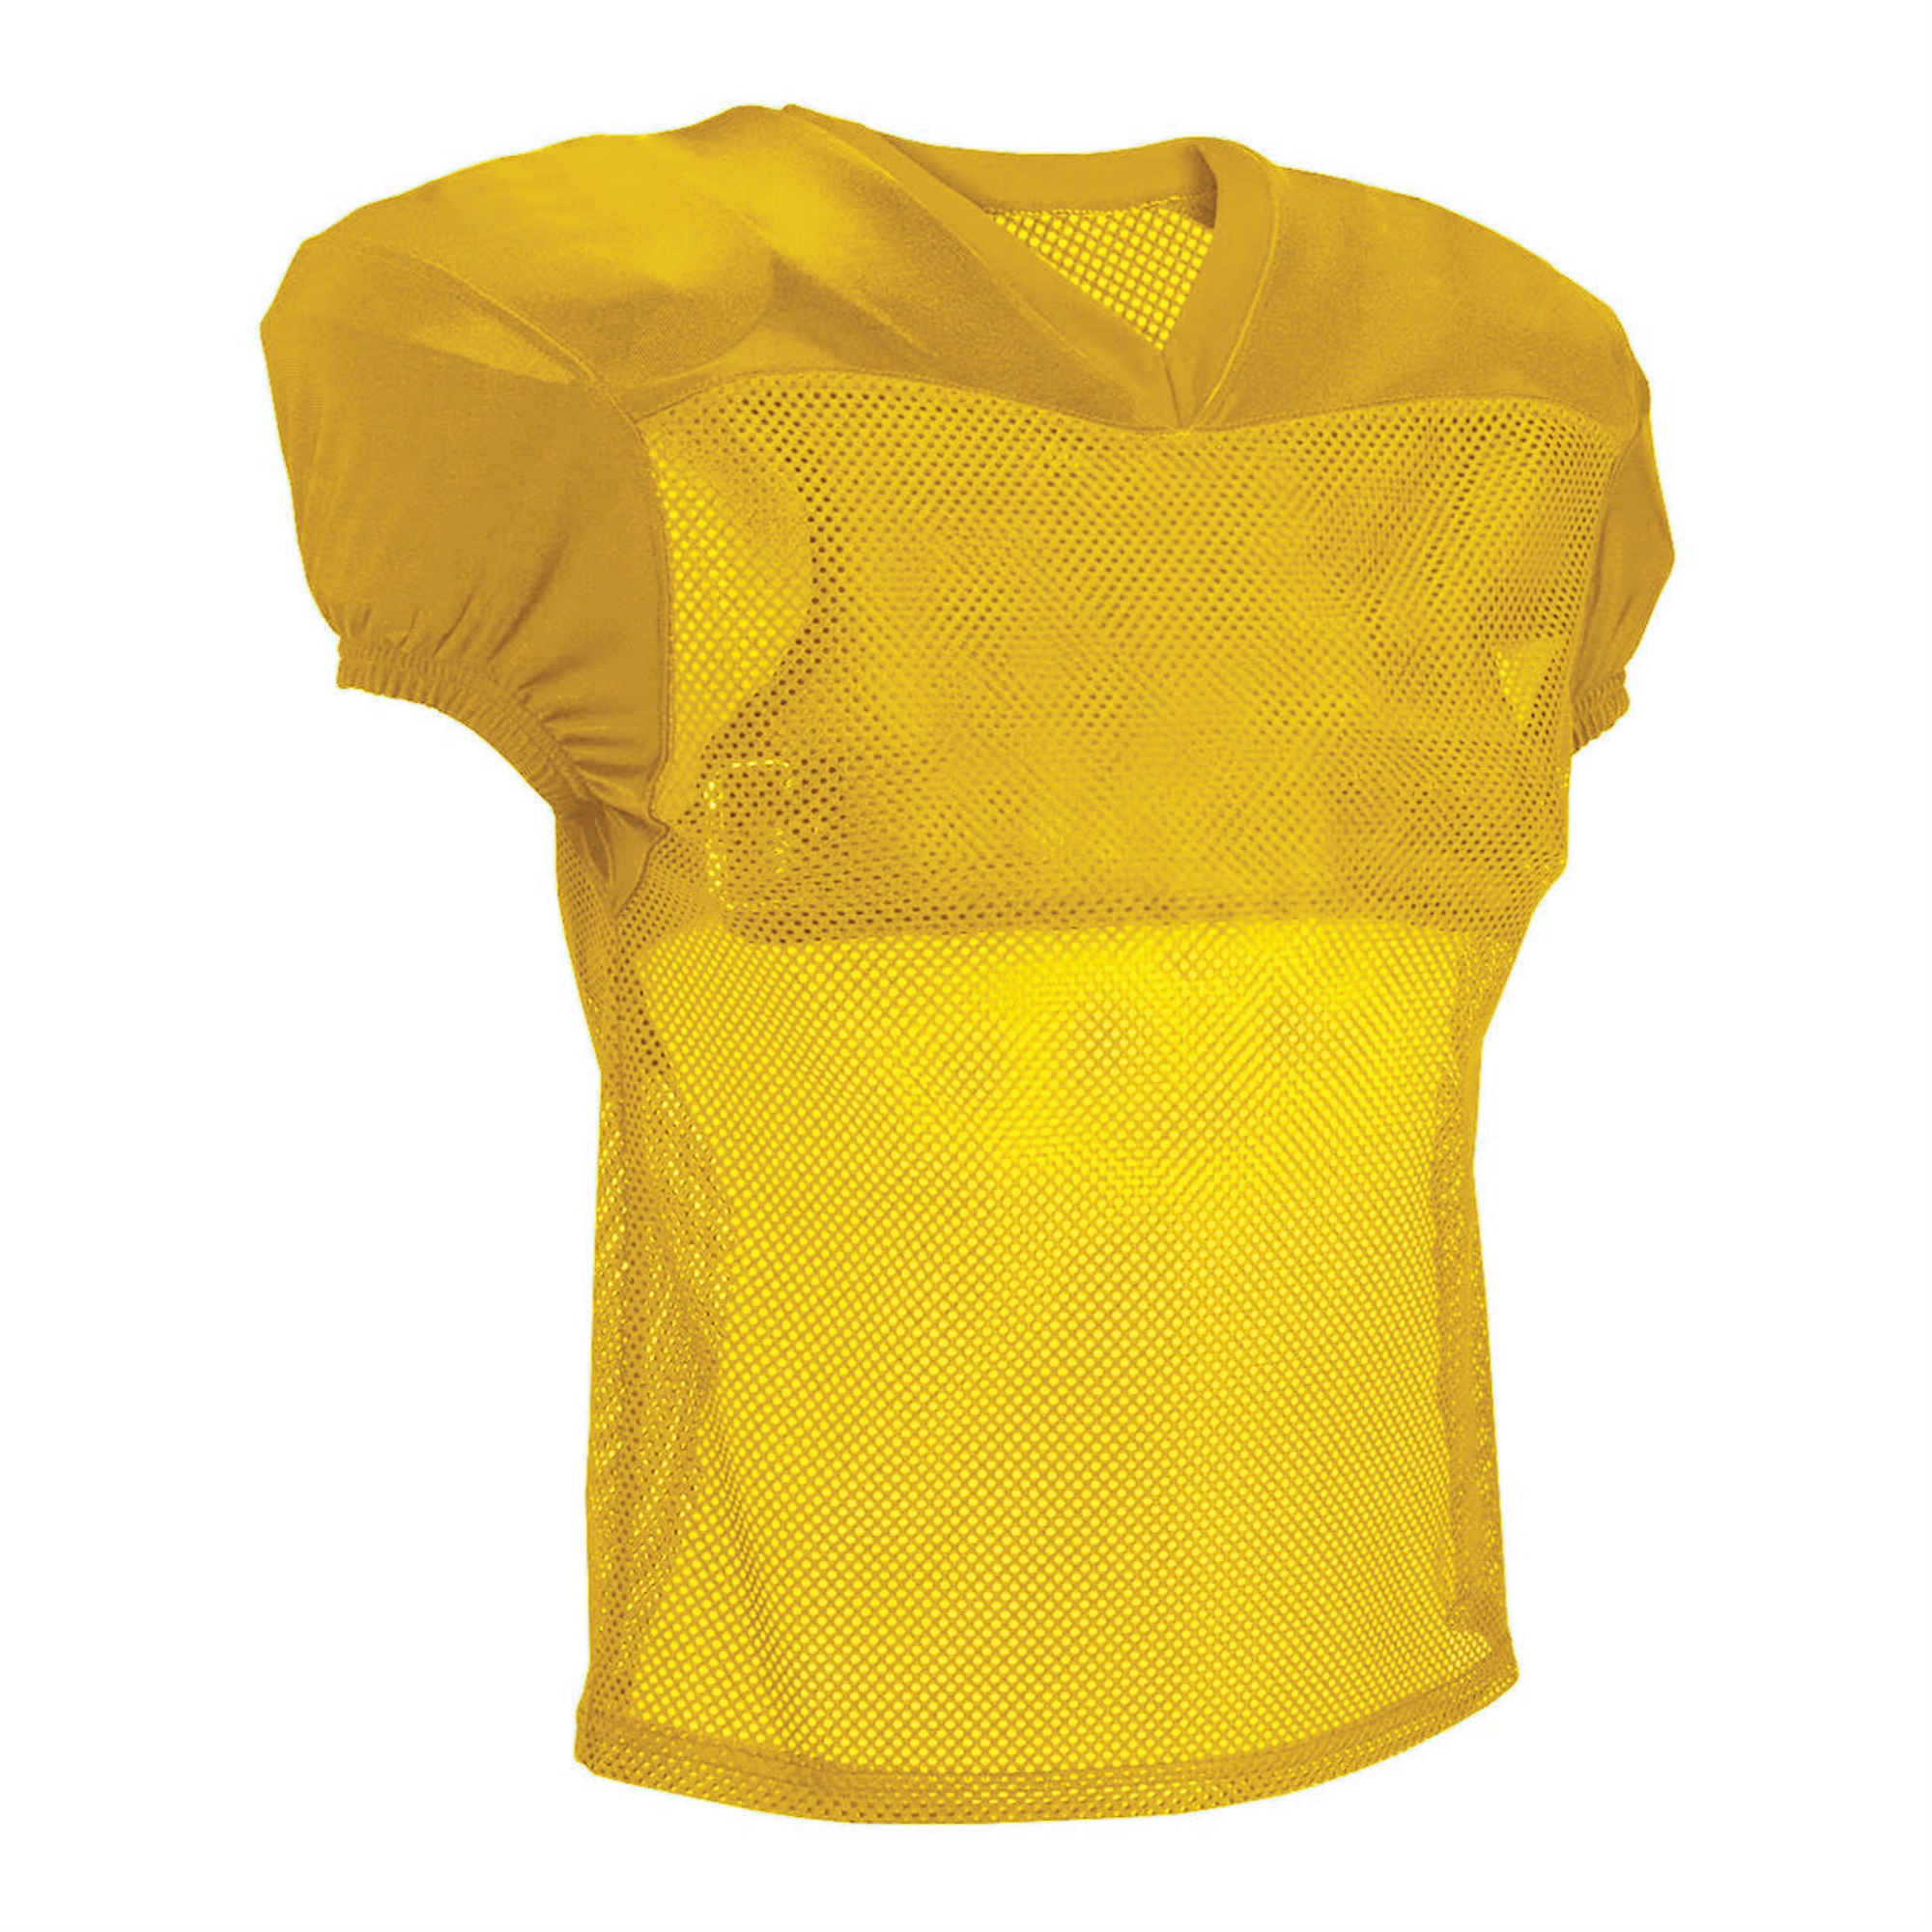 Martin Sports ADULT PRACTICE JERSEY-GOLD-2X/3X